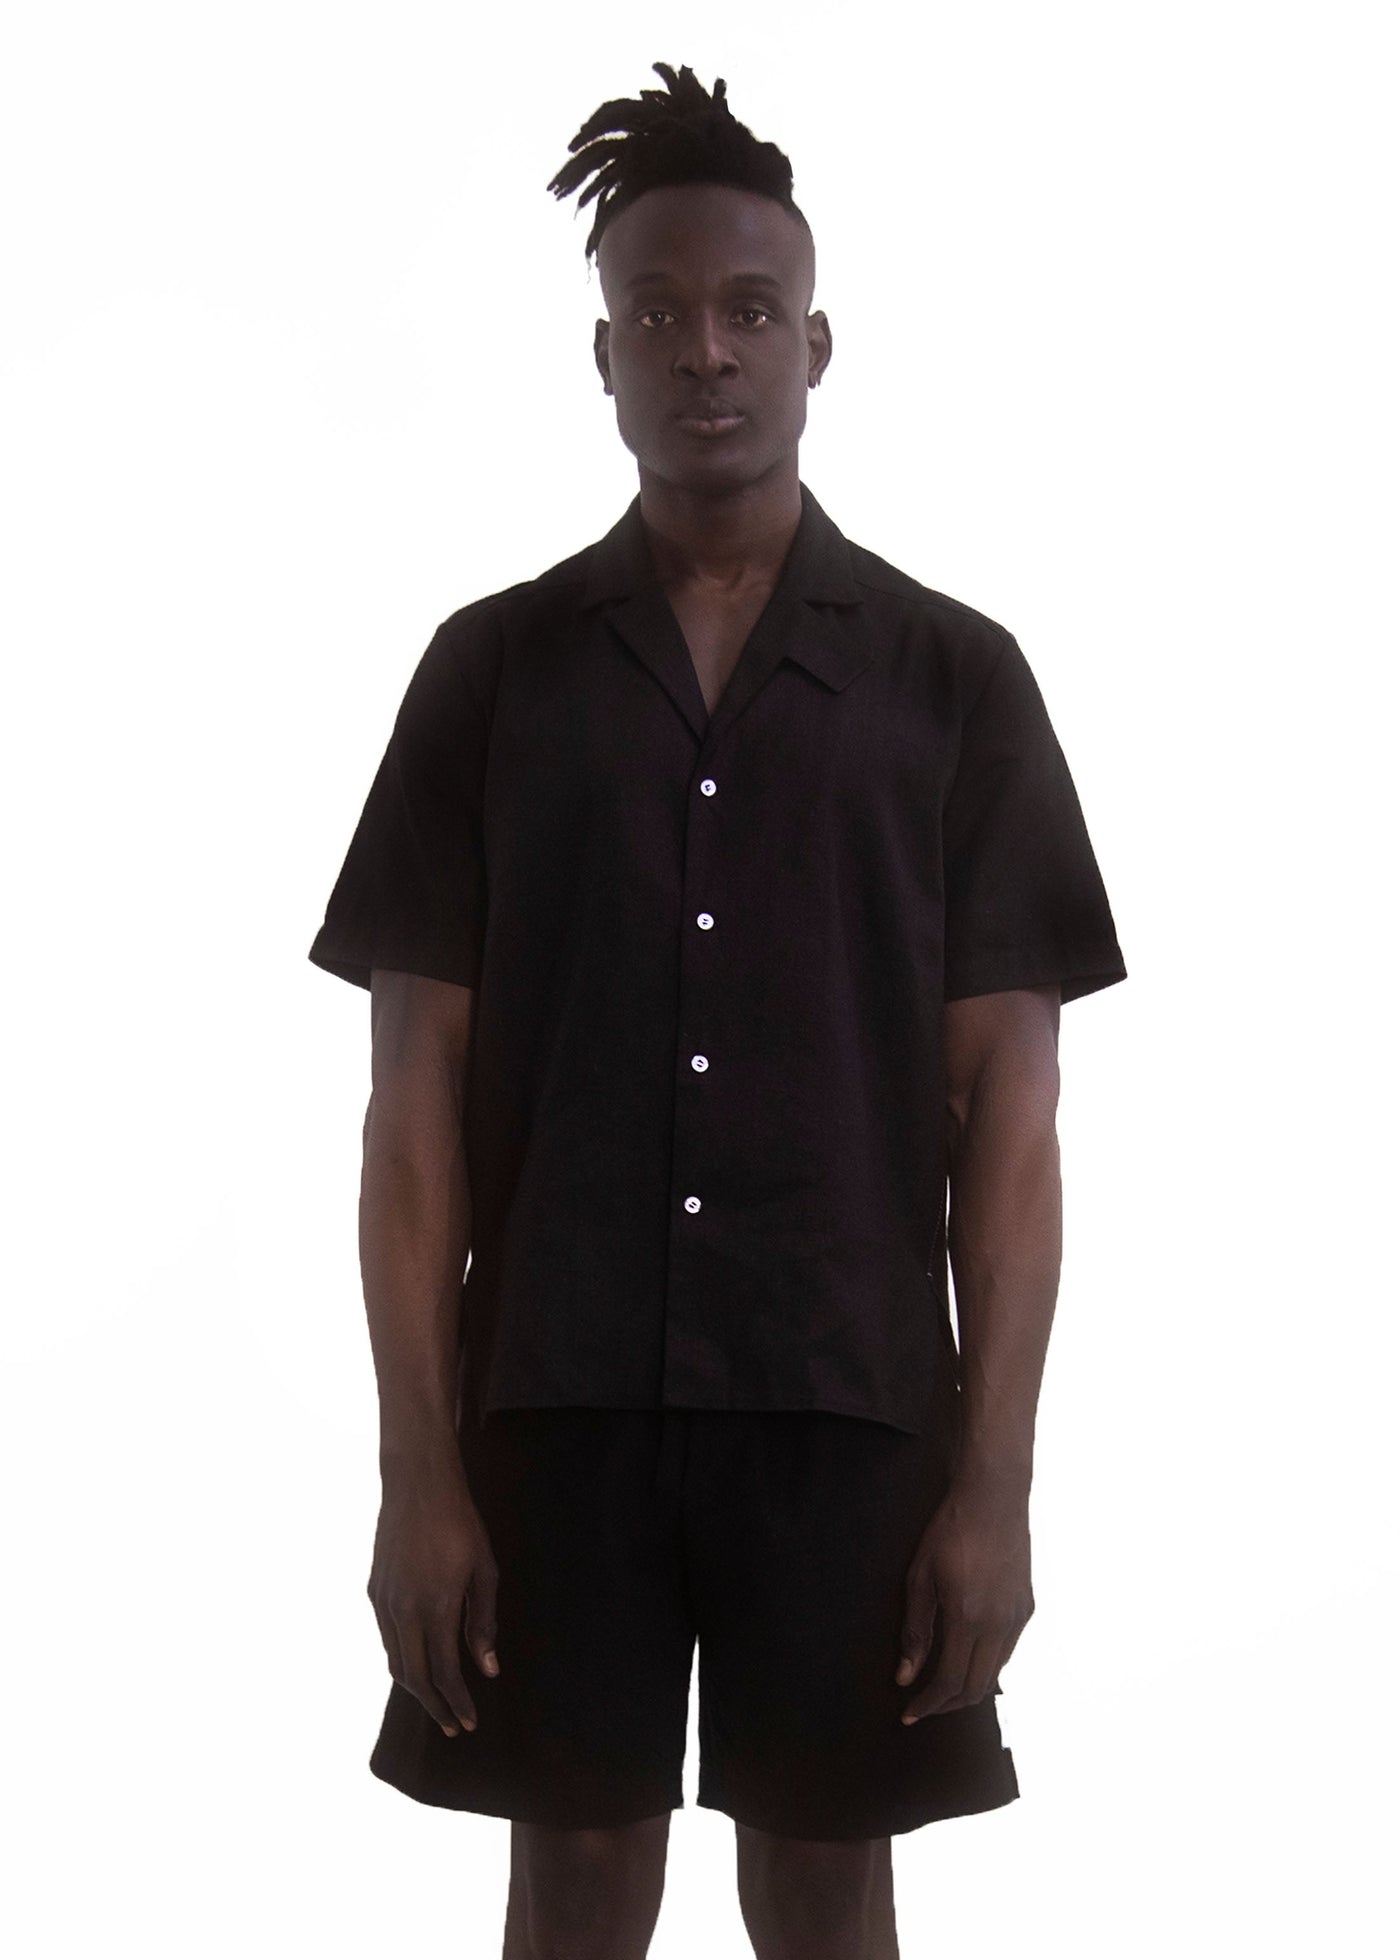 Max Linen Shirt / linen 100 % upcycled / Made to order